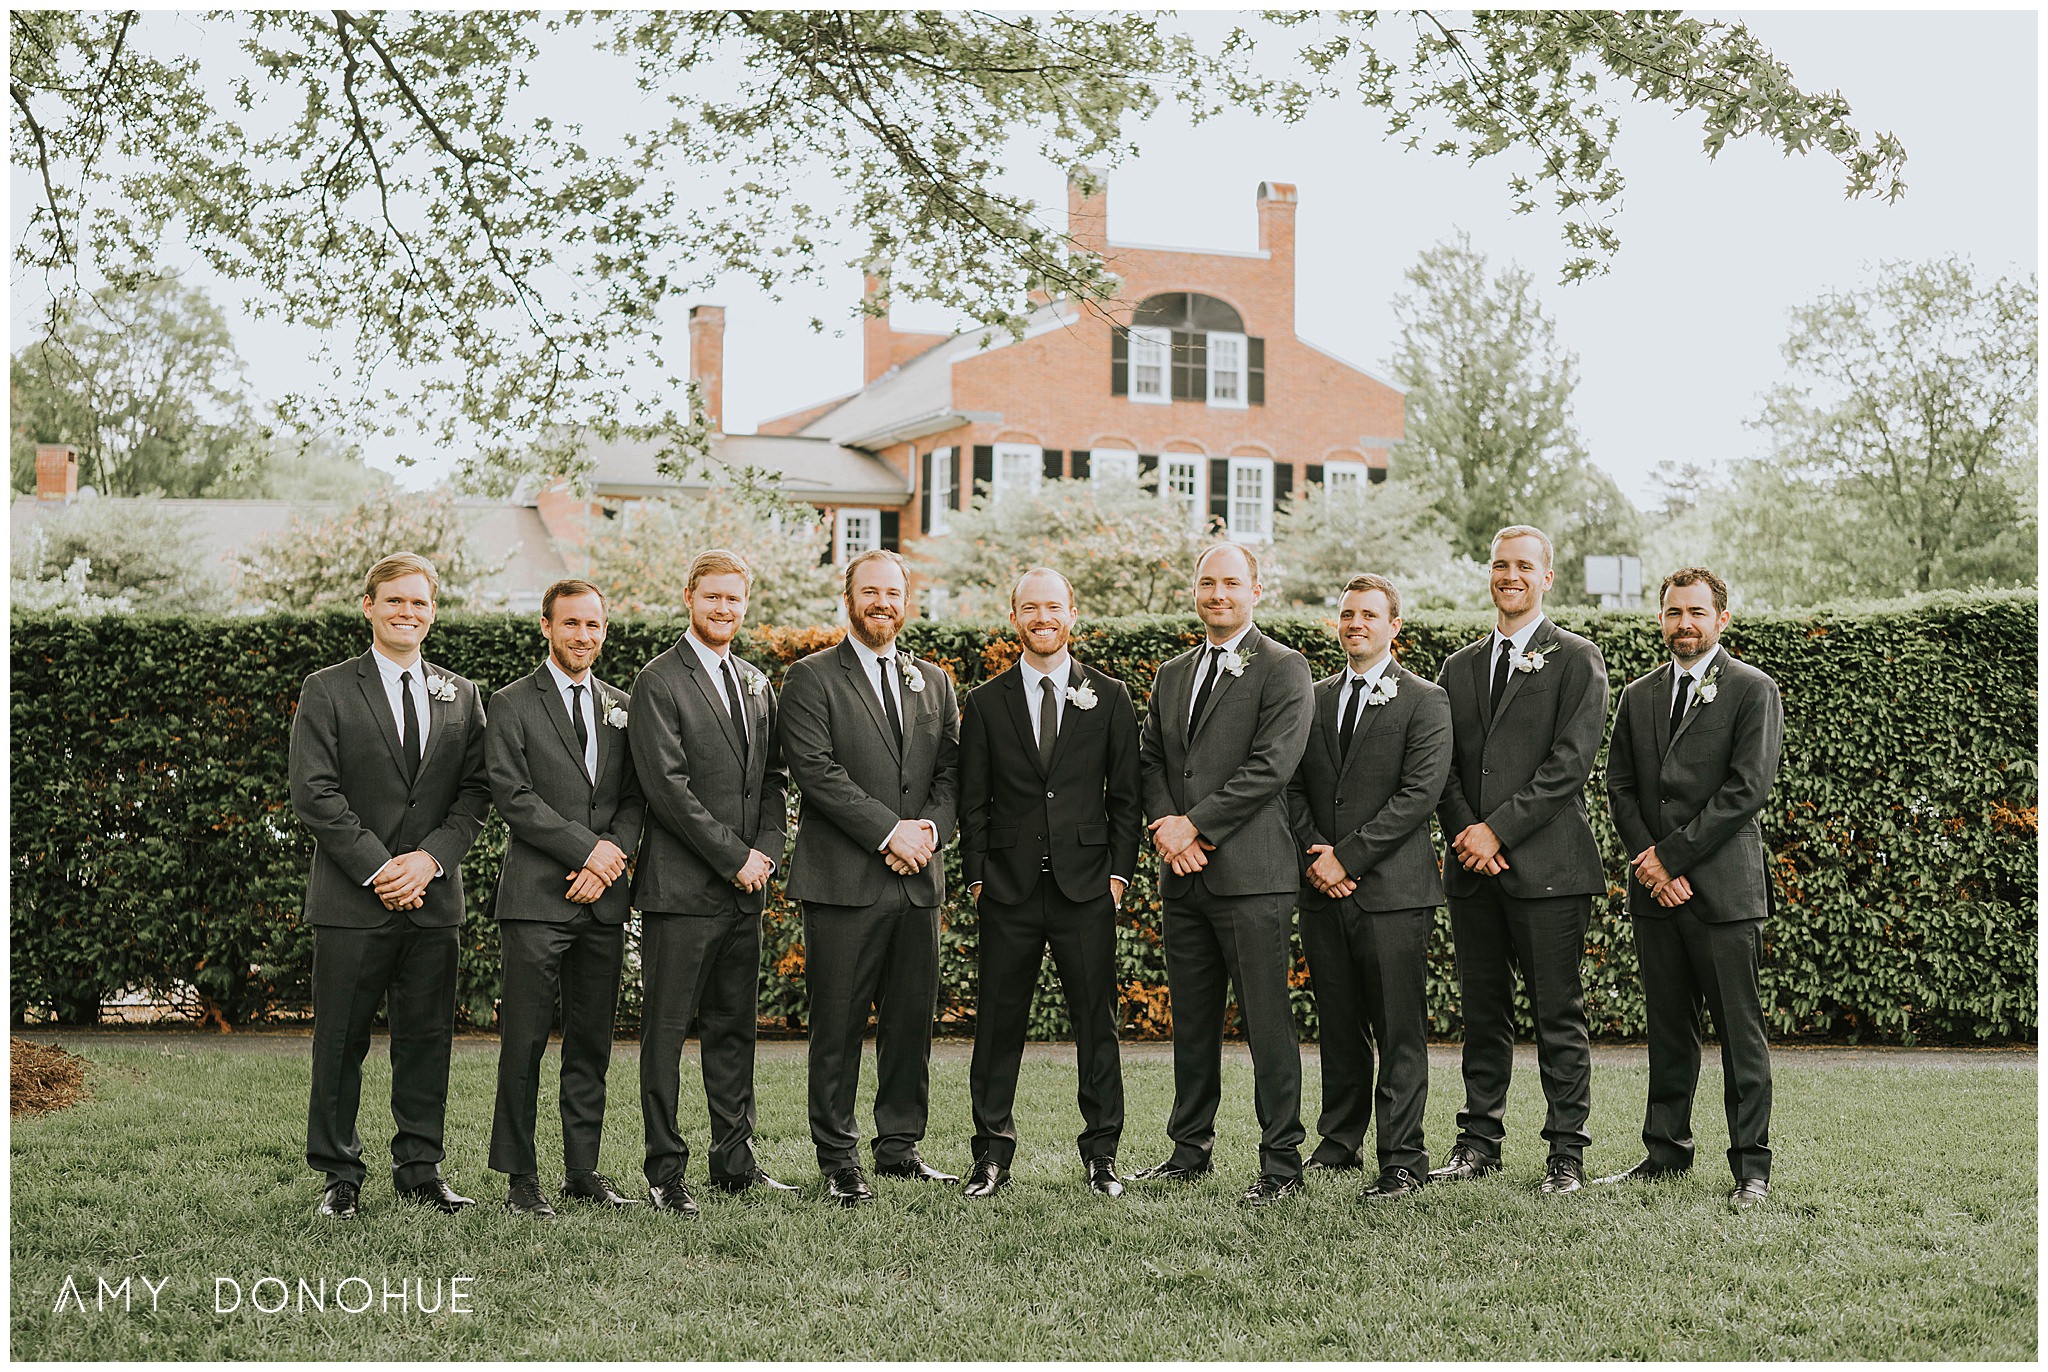 Bridal Party photos on the front lawn at The Woodstock Inn & Resort in Woodstock, Vermont